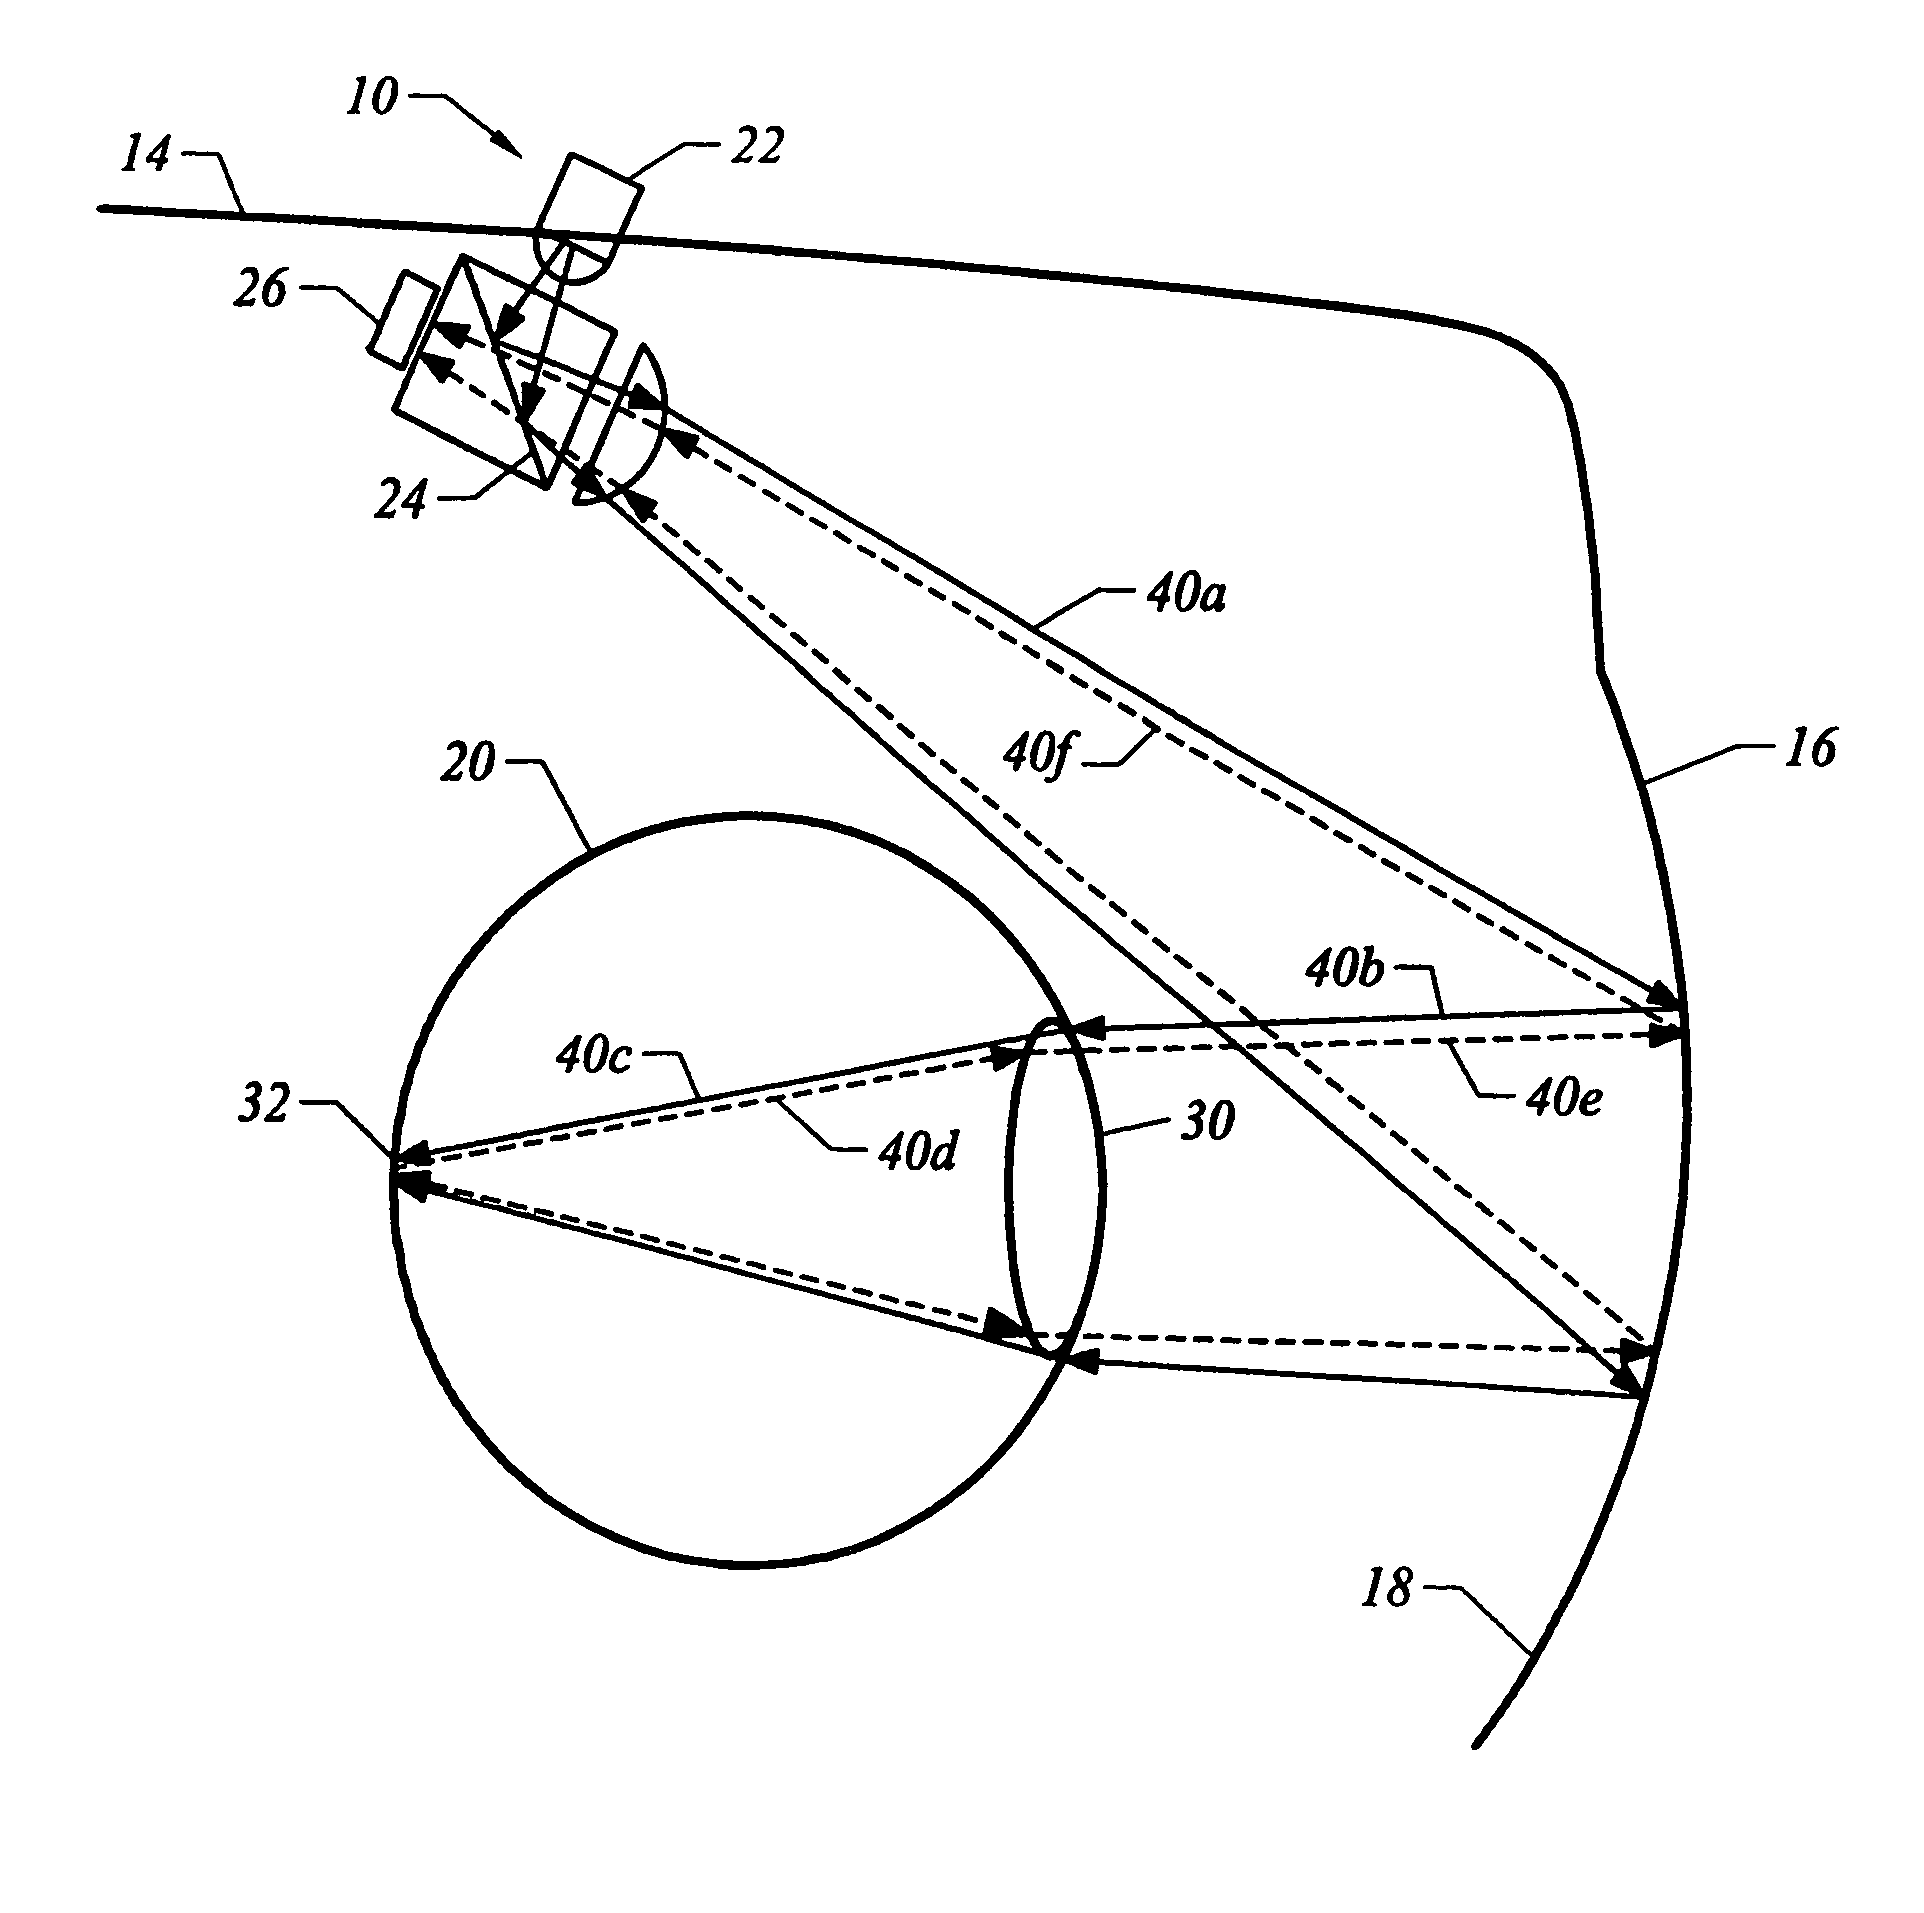 Optical system for monitoring eye movement